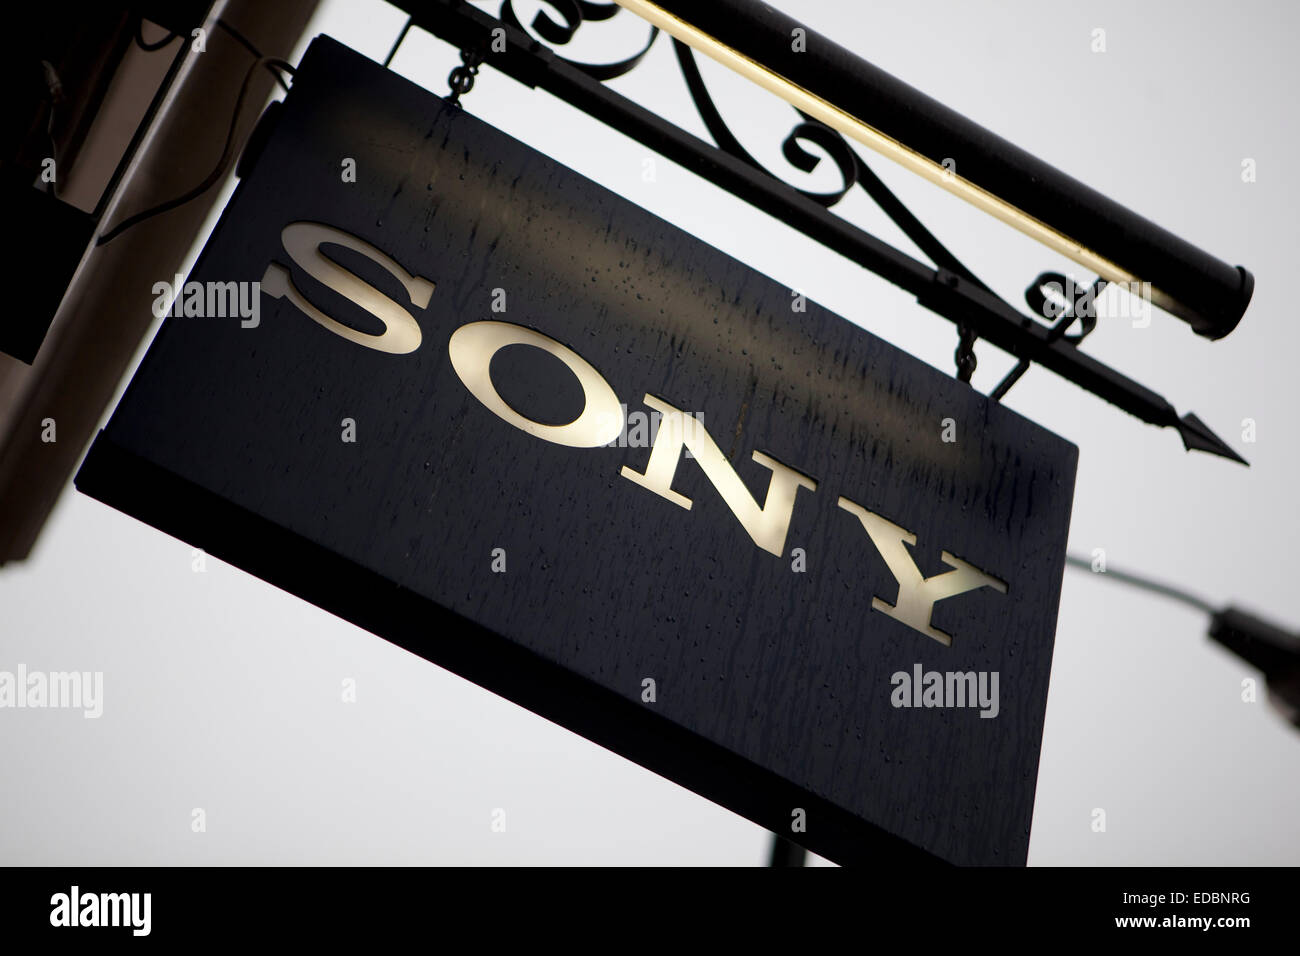 External shot of a Sony centre shop sign. Stock Photo